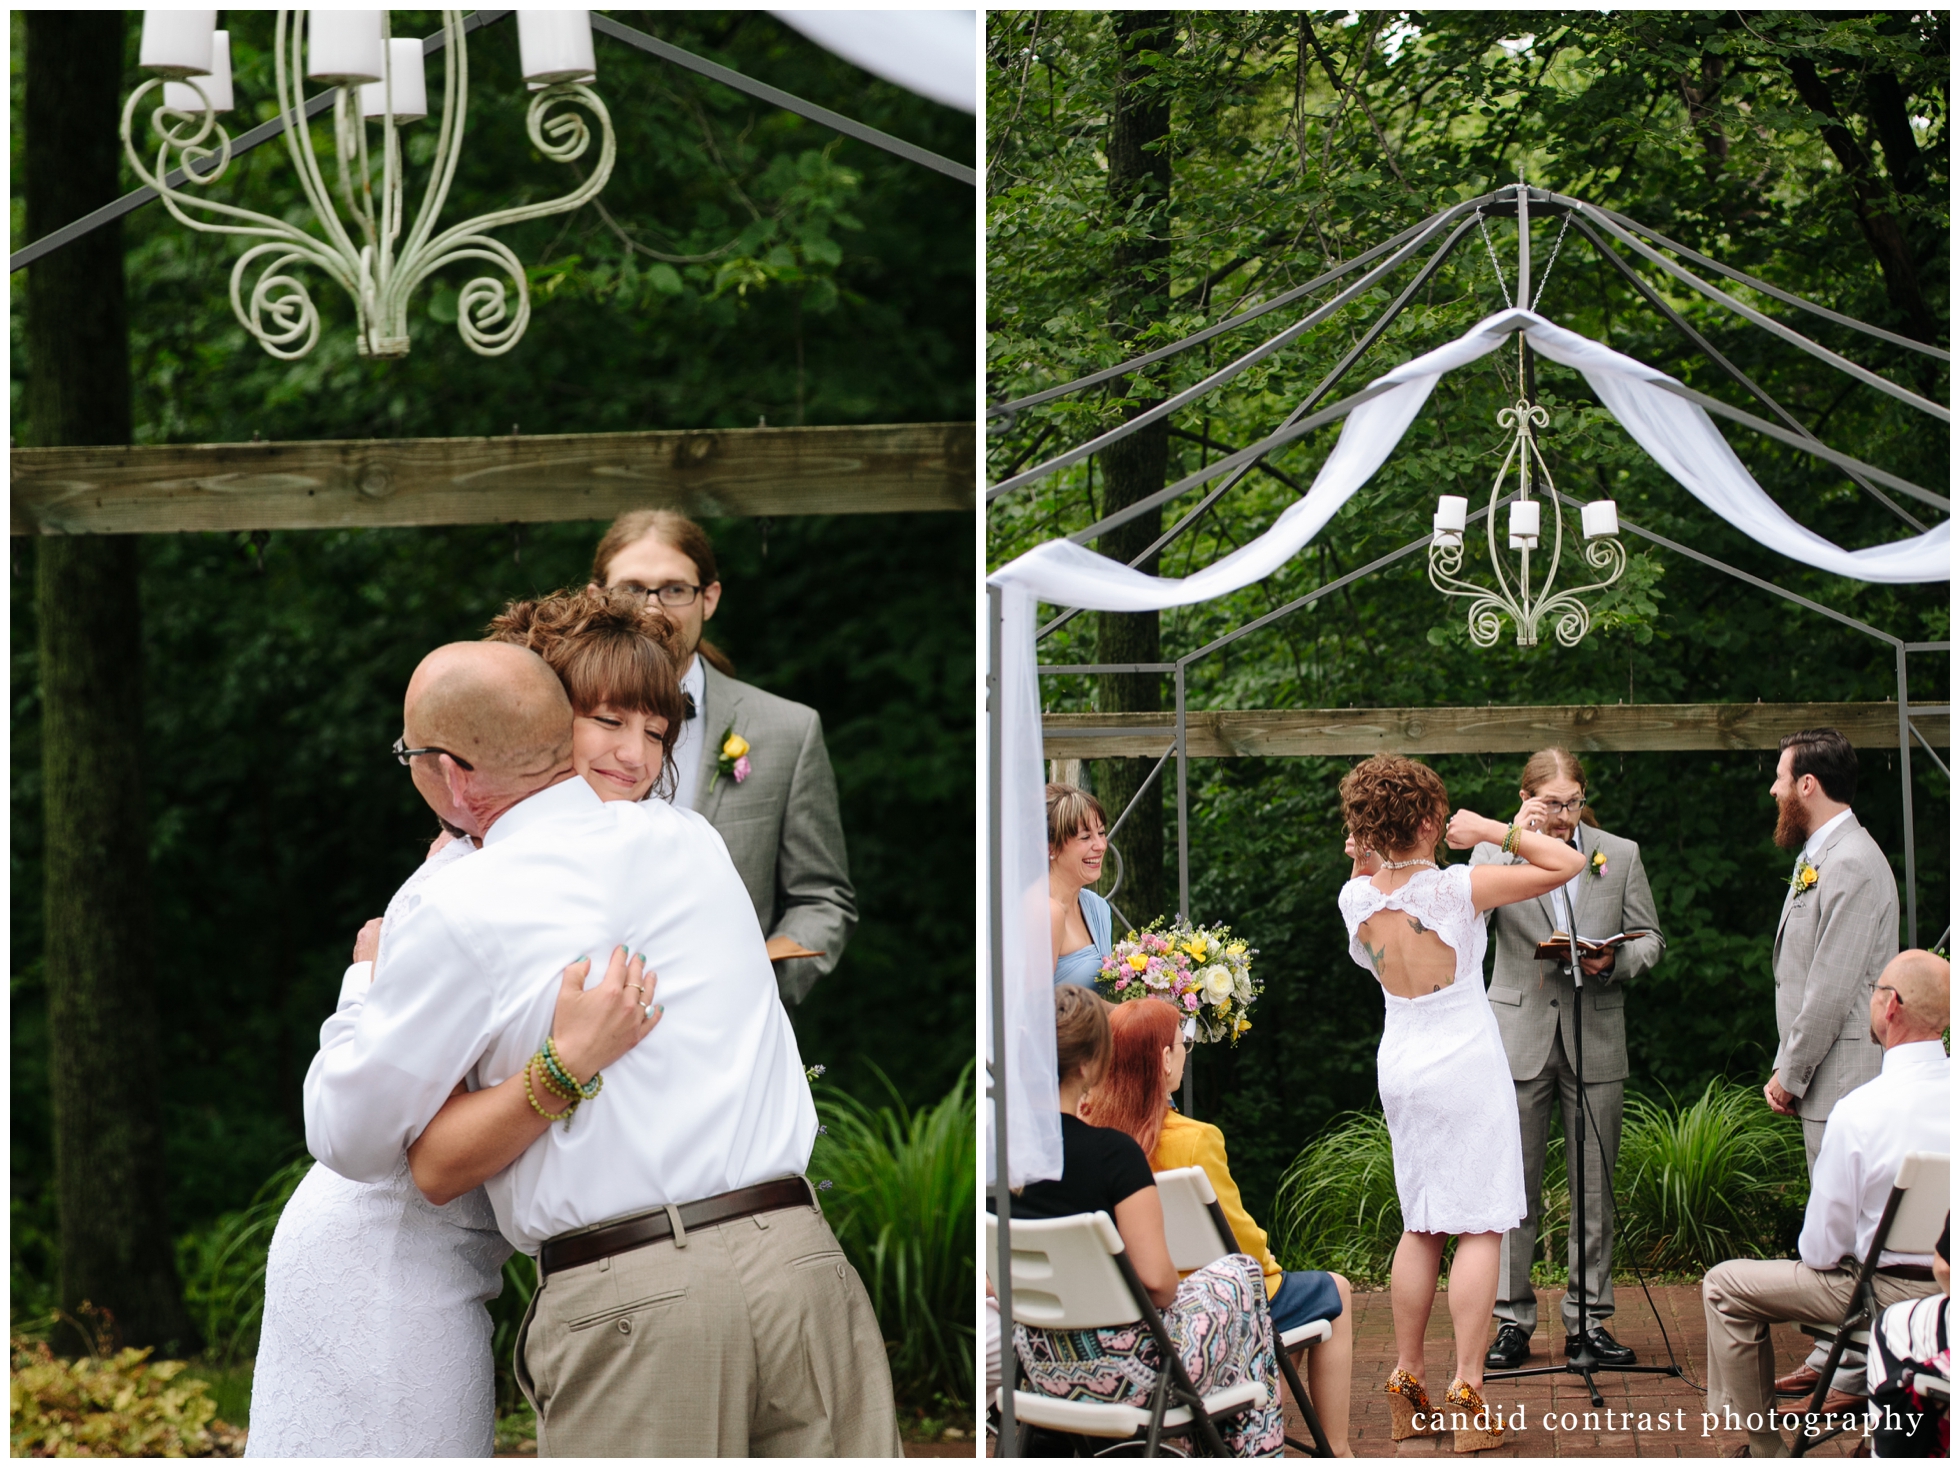 wedding ceremony candid moments at backyard wedding in dubuque, ia, candid contrast photography